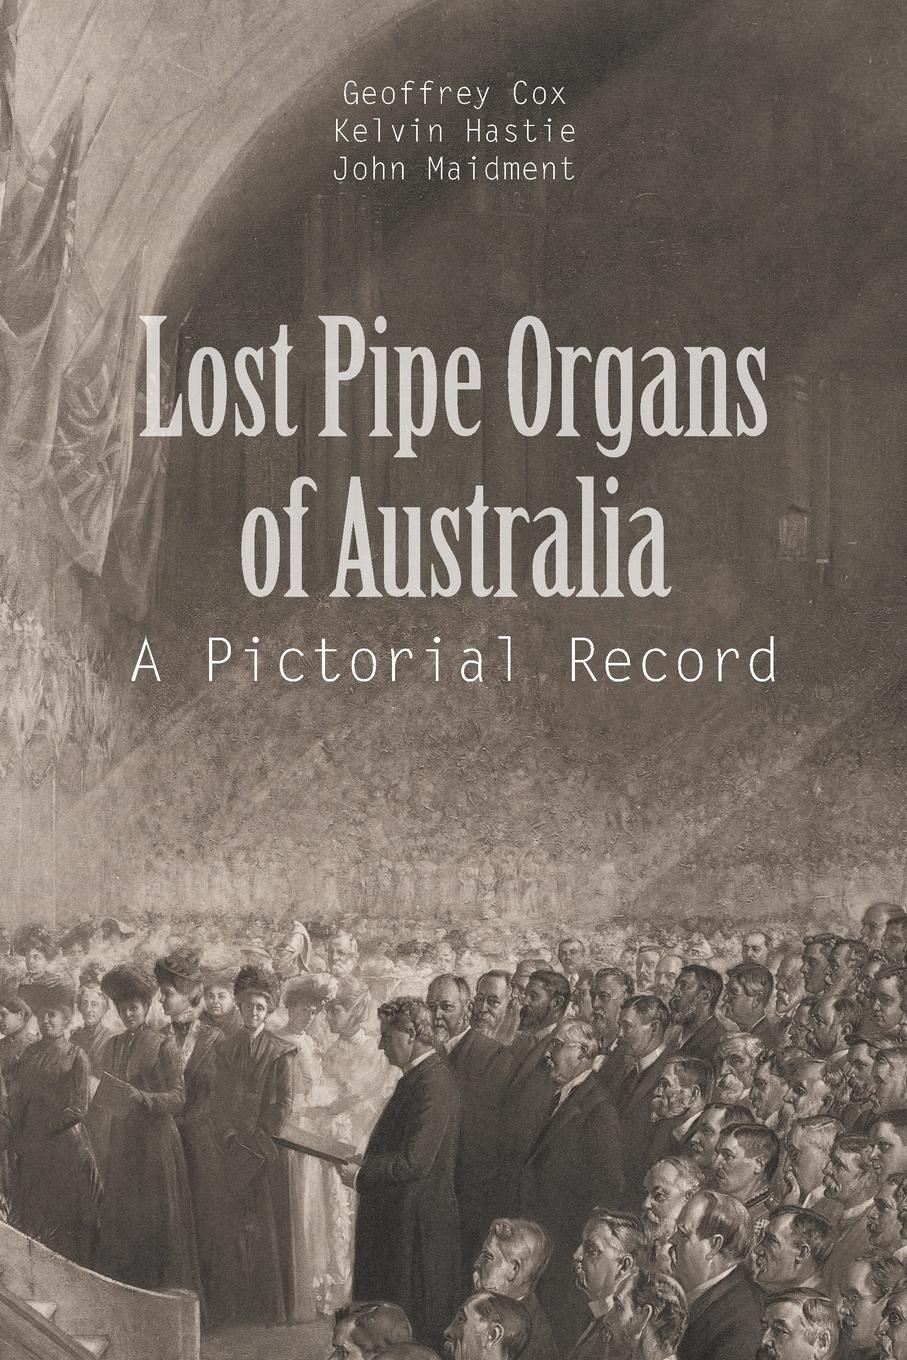 Lost Pipe Organs of Australia. A Pictorial Record